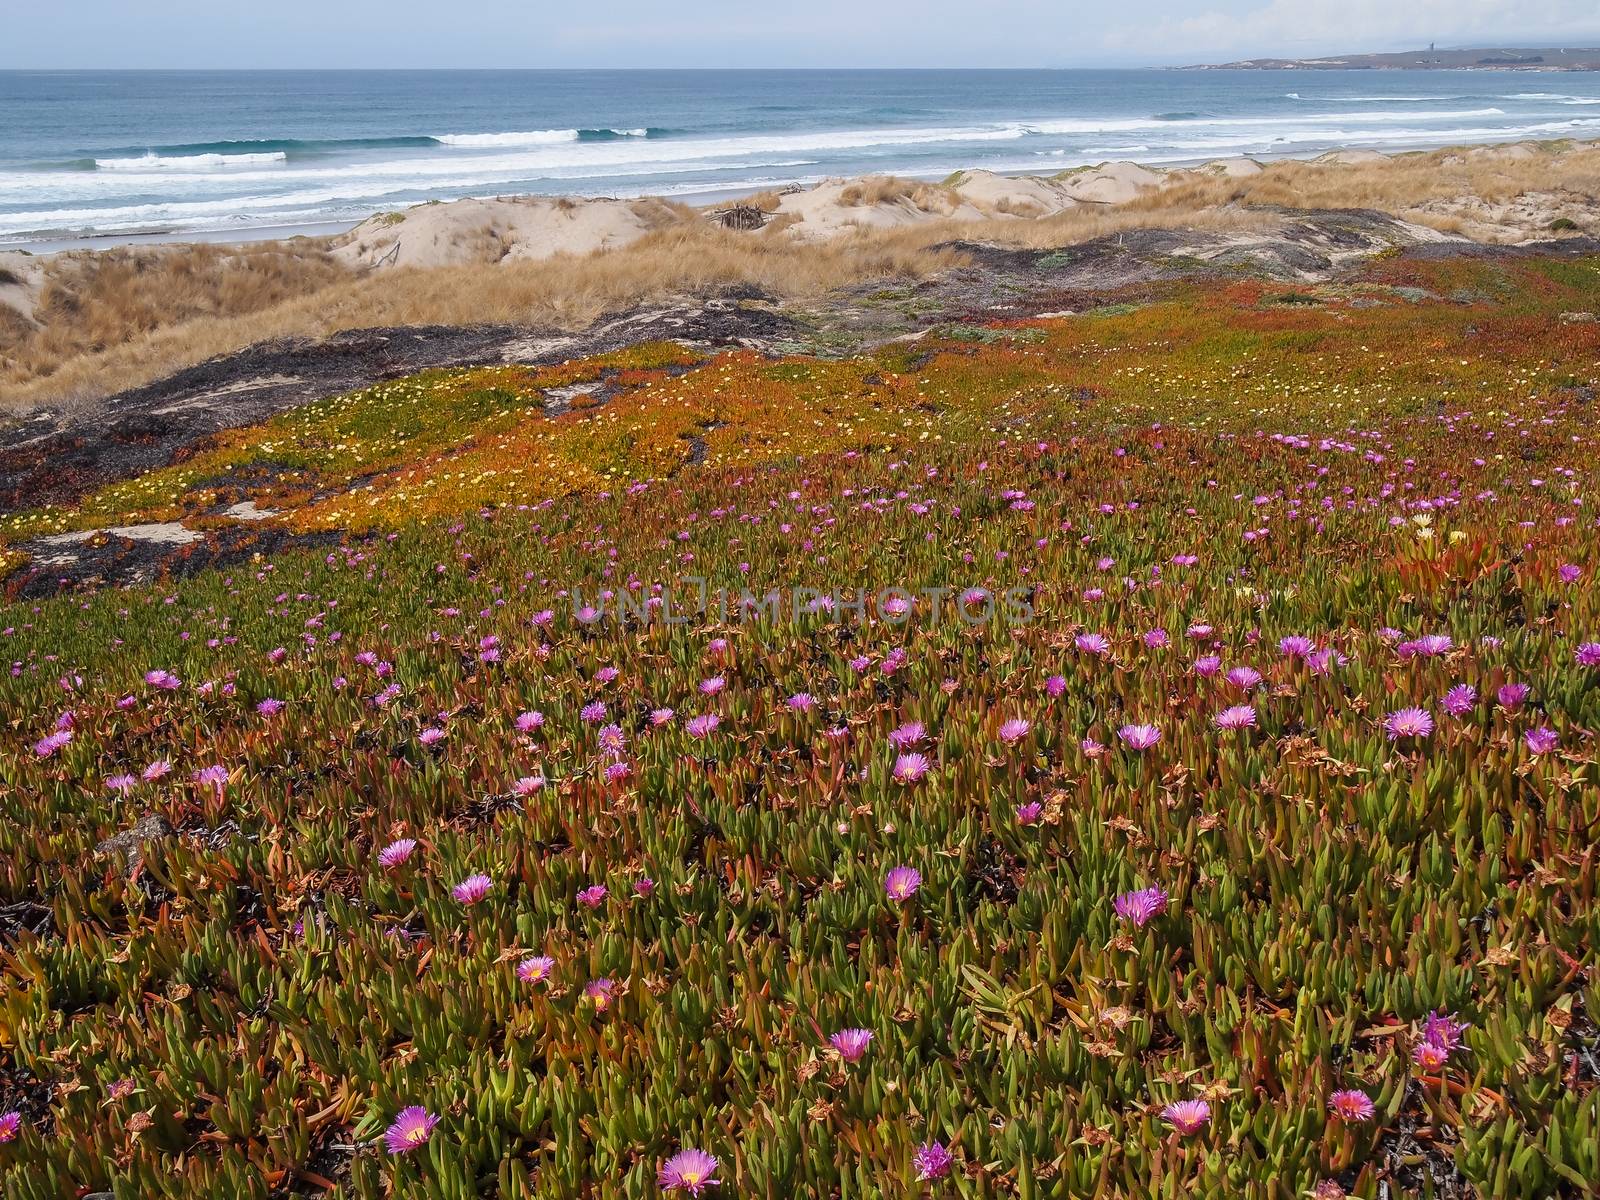 Wild flowers on the beach by simpleBE